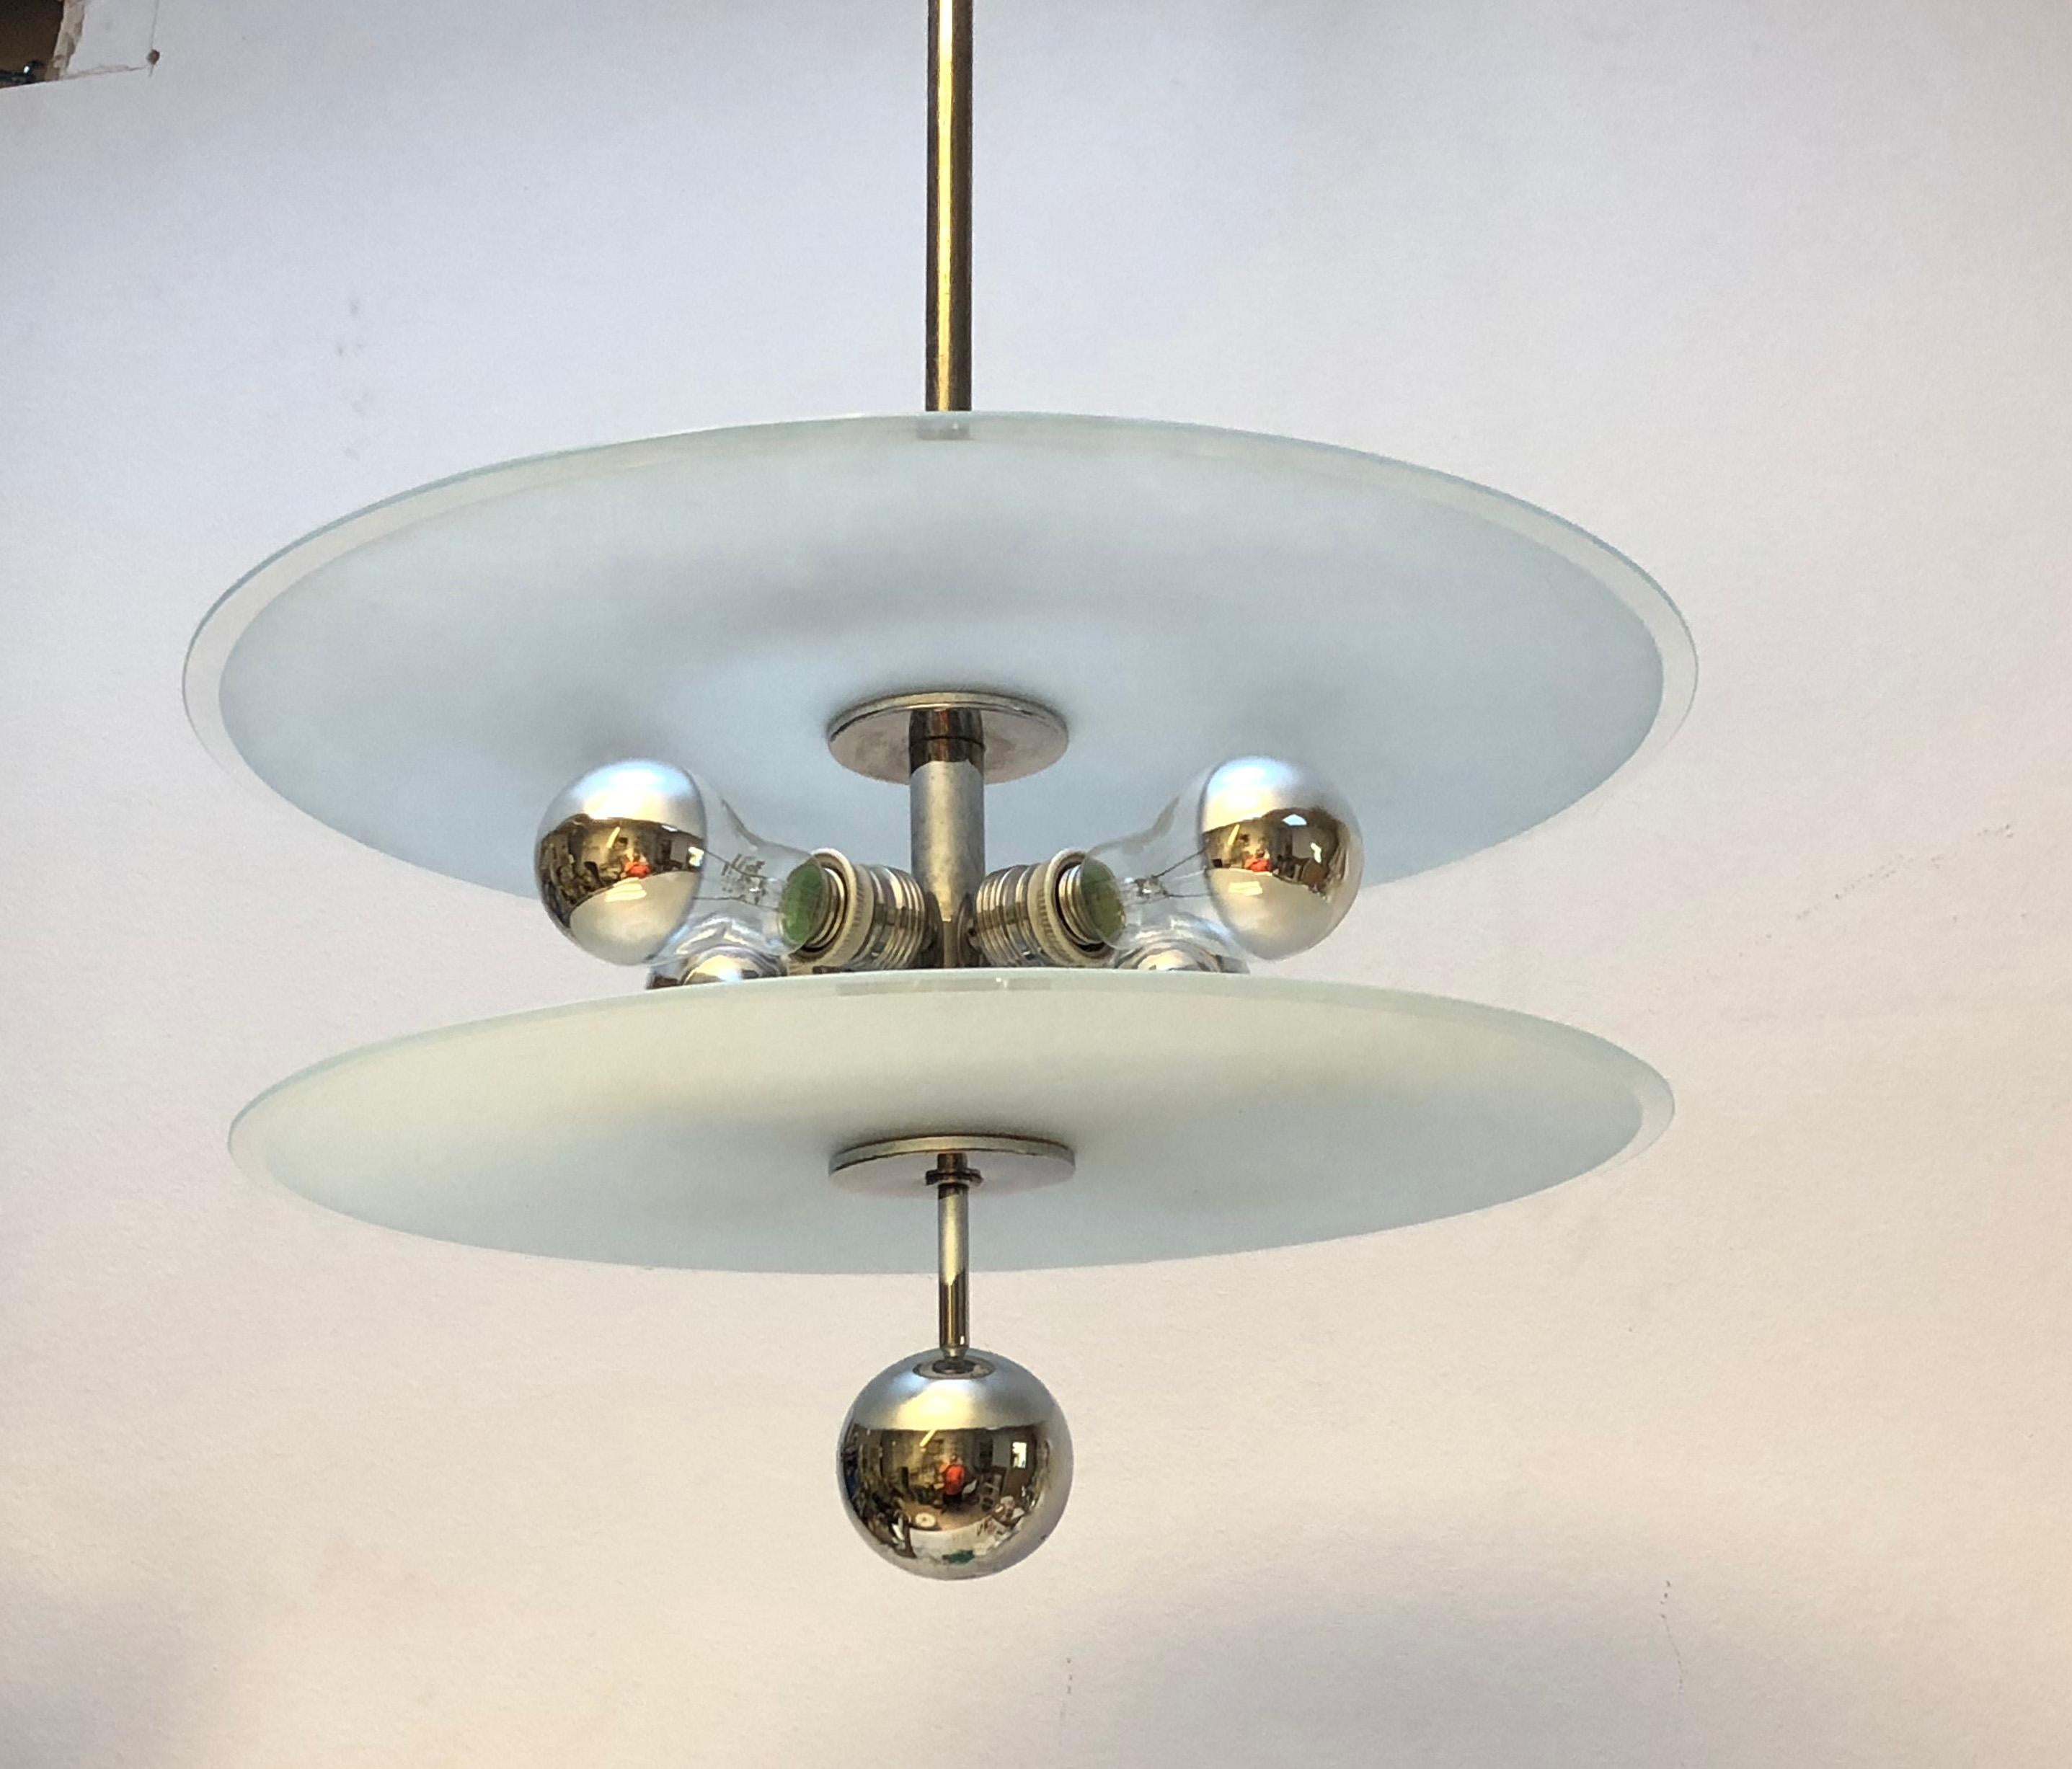 Bauhaus Chandelier by Schwintzer & Graeff from the 1930s For Sale 1